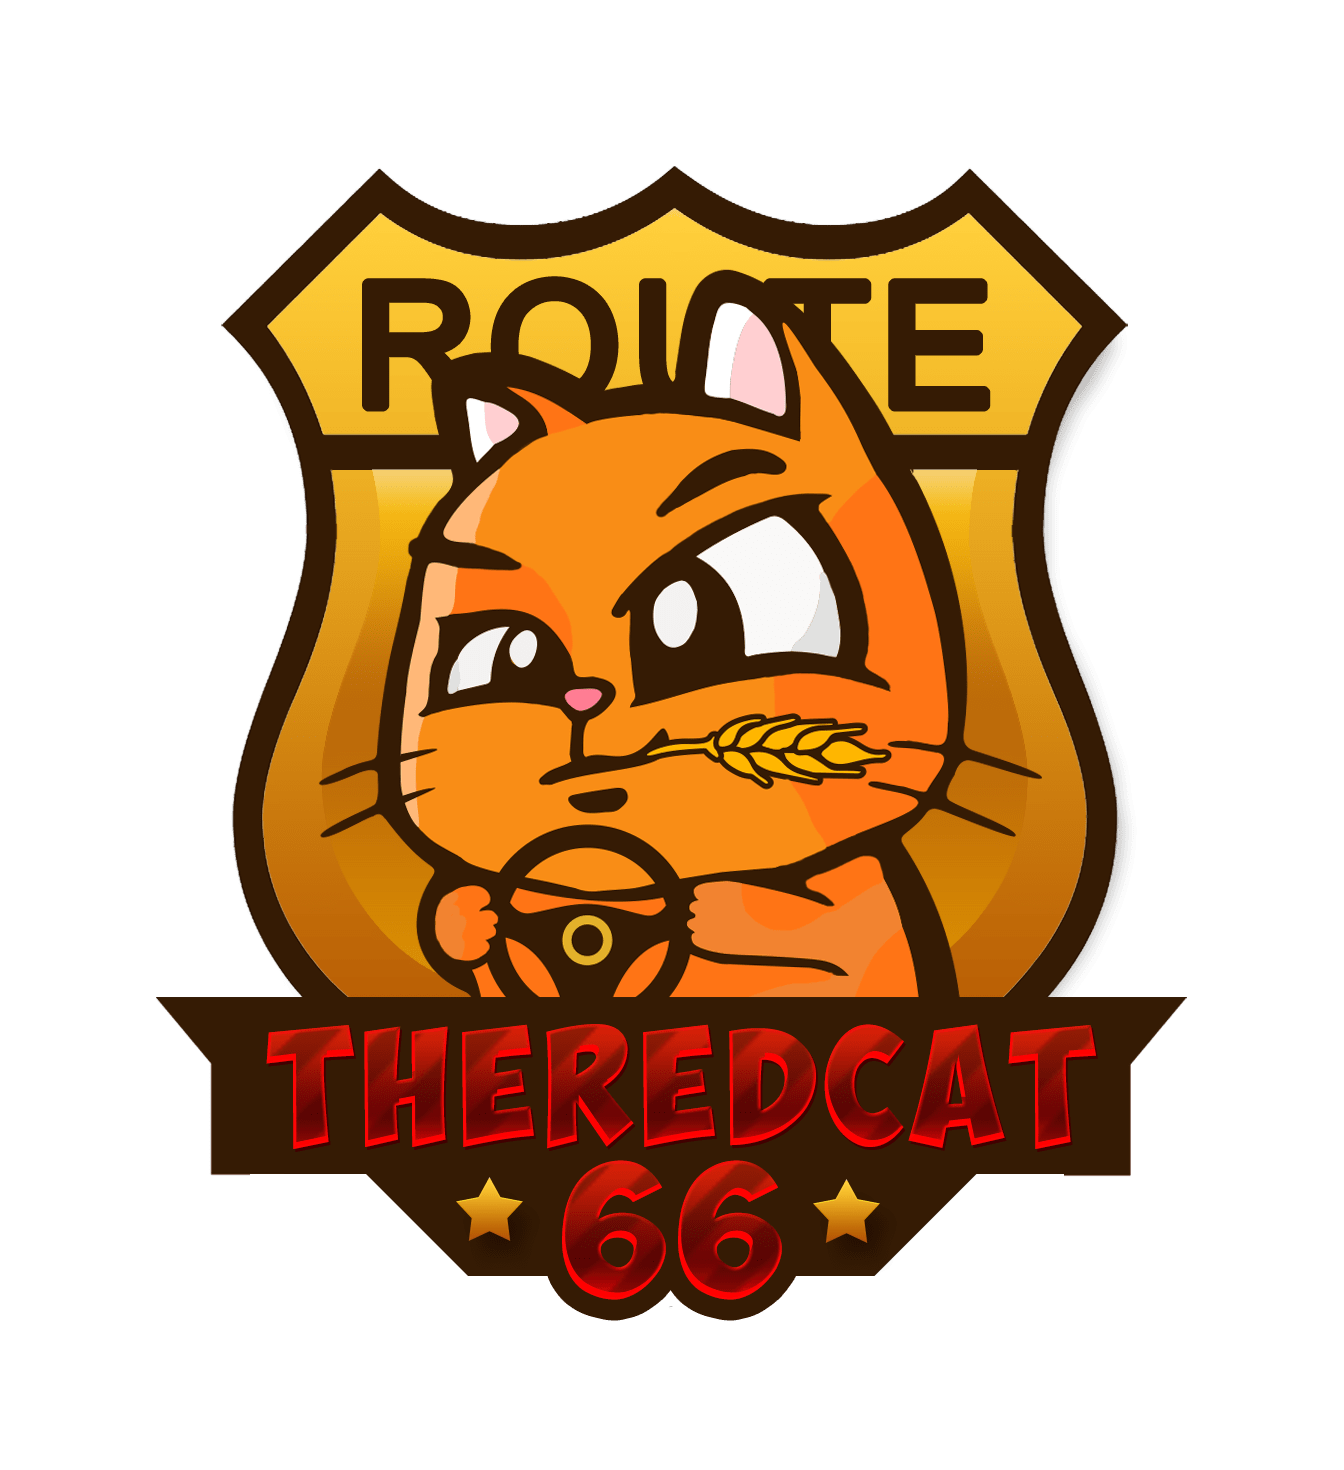 TheRedCat66